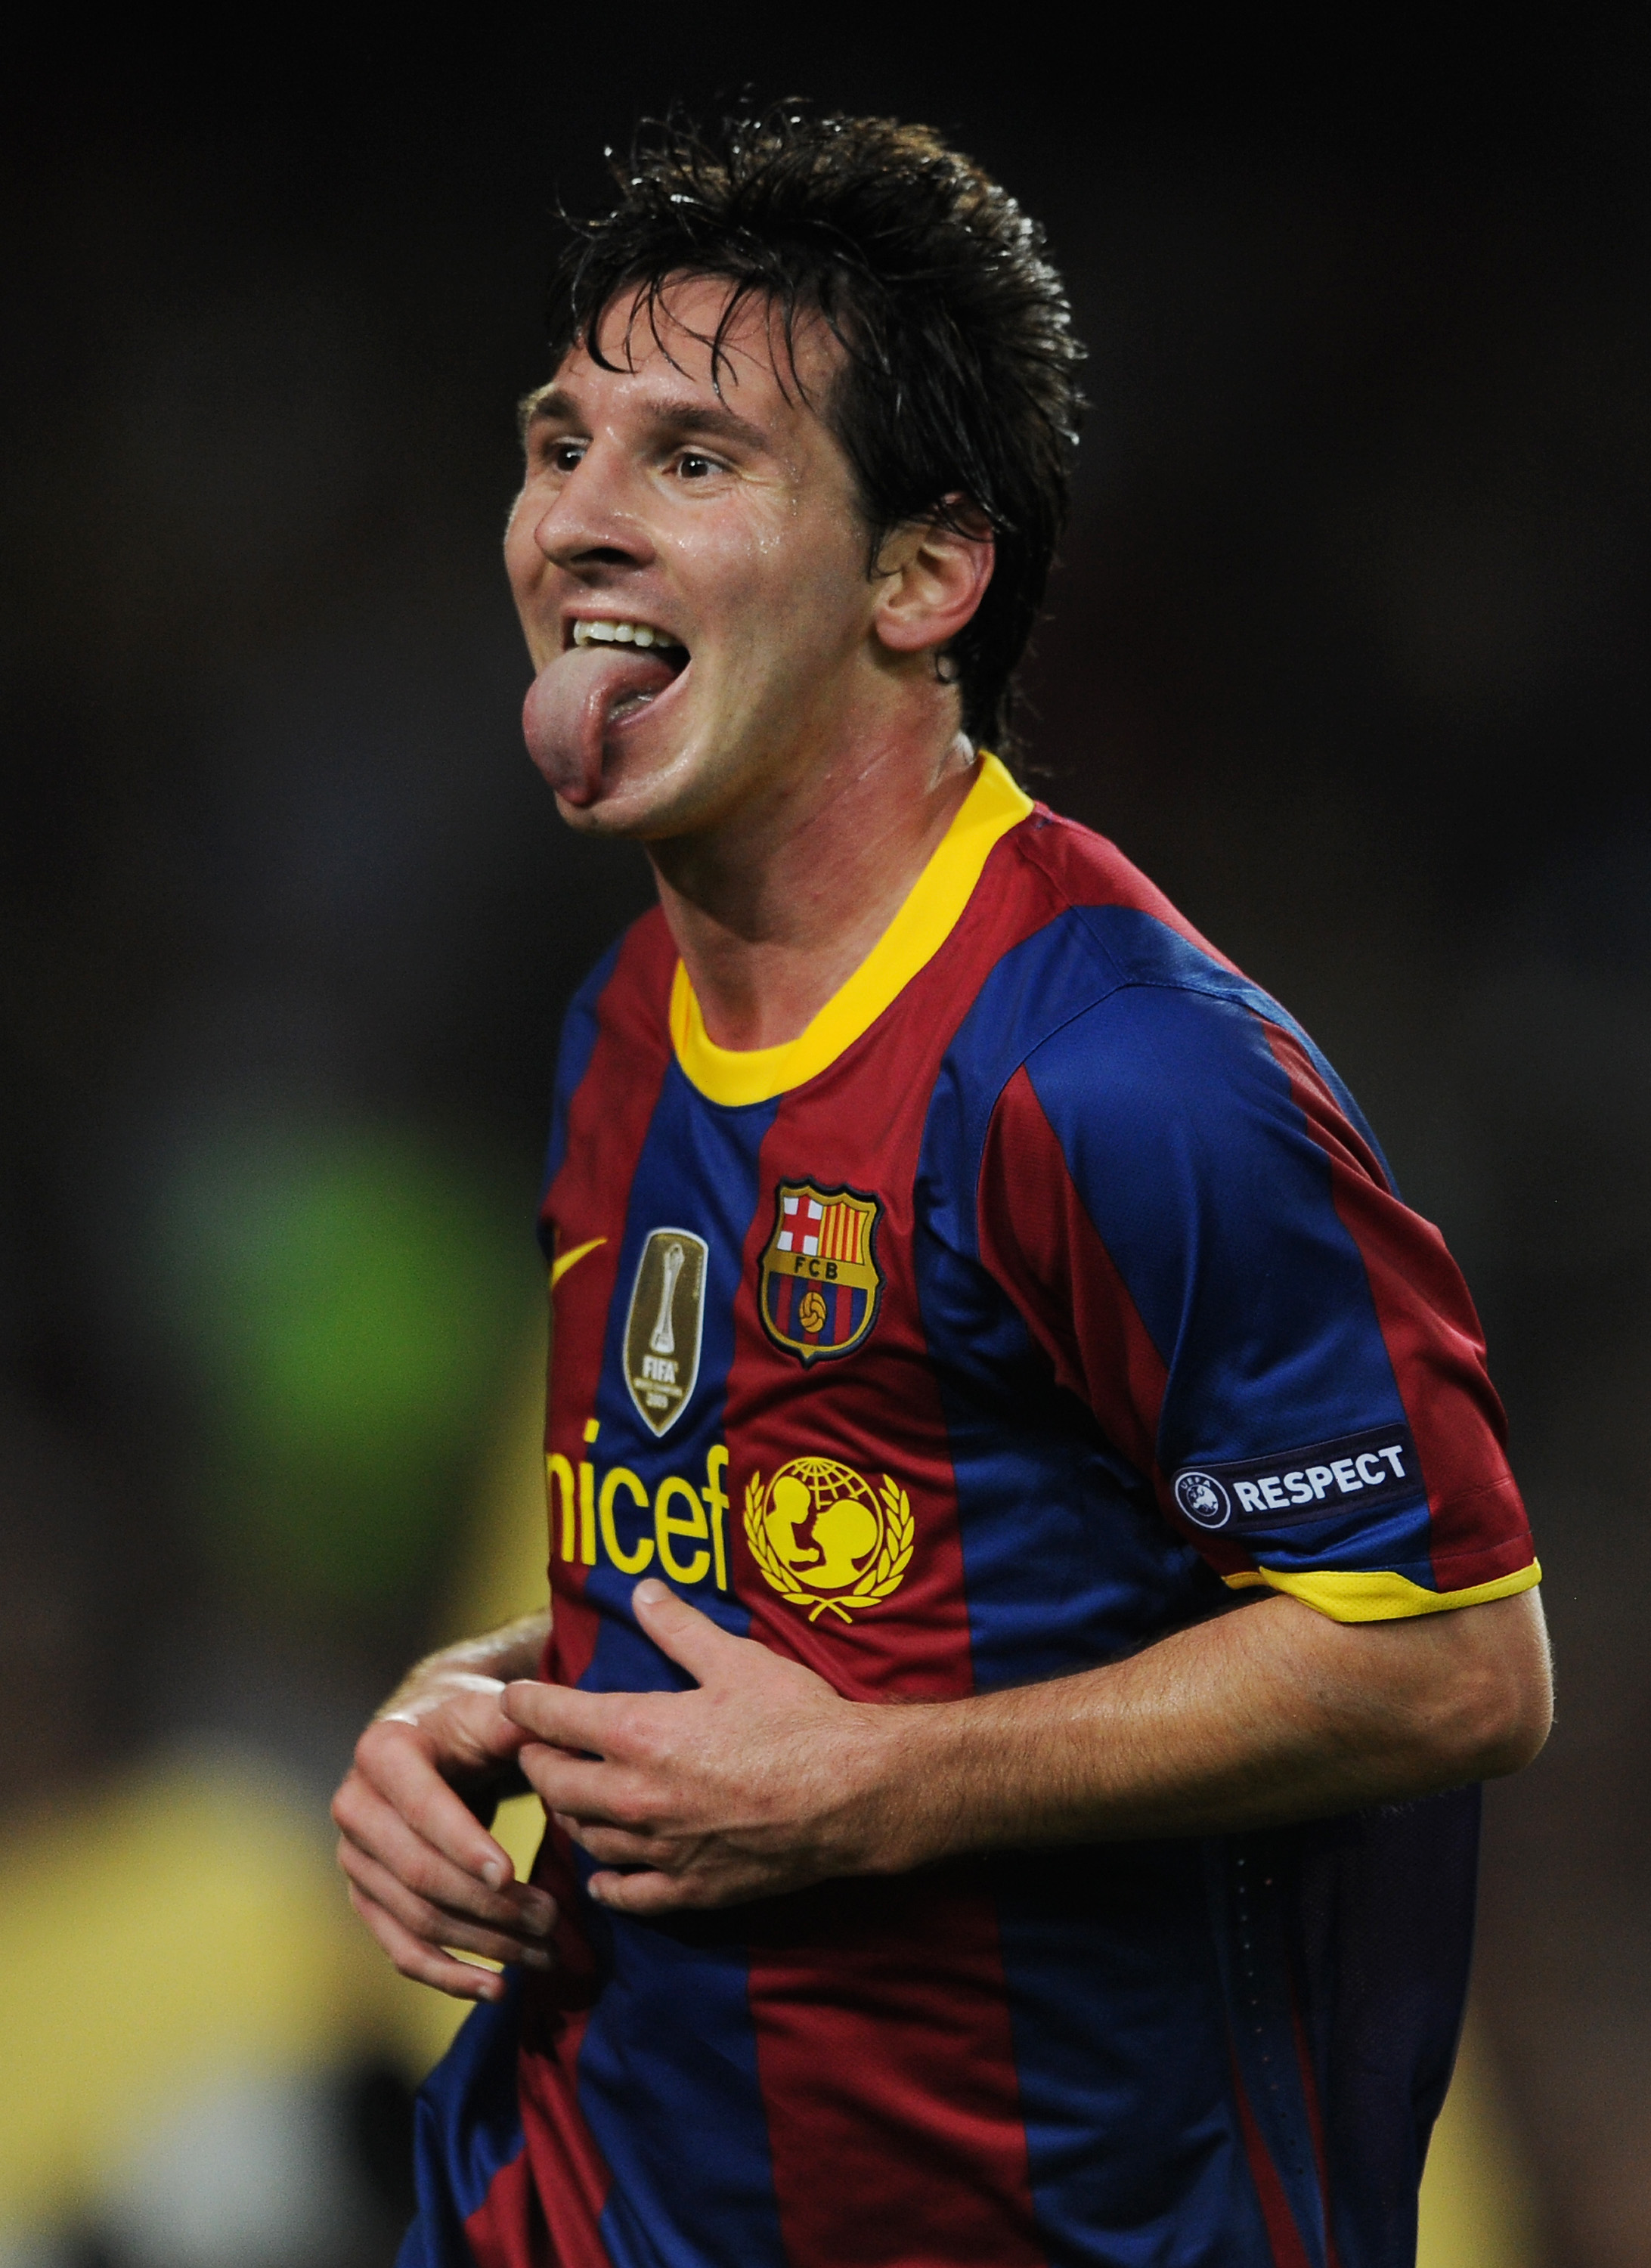 BARCELONA, SPAIN - SEPTEMBER 14:  Lionel Messi of Barcelona celebrates scoring his sides third goal during the UEFA Champions League group D match between Barcelona and Panathinaikos on September 14, 2010 in Barcelona, Spain. Barcelona won the match 5-1.